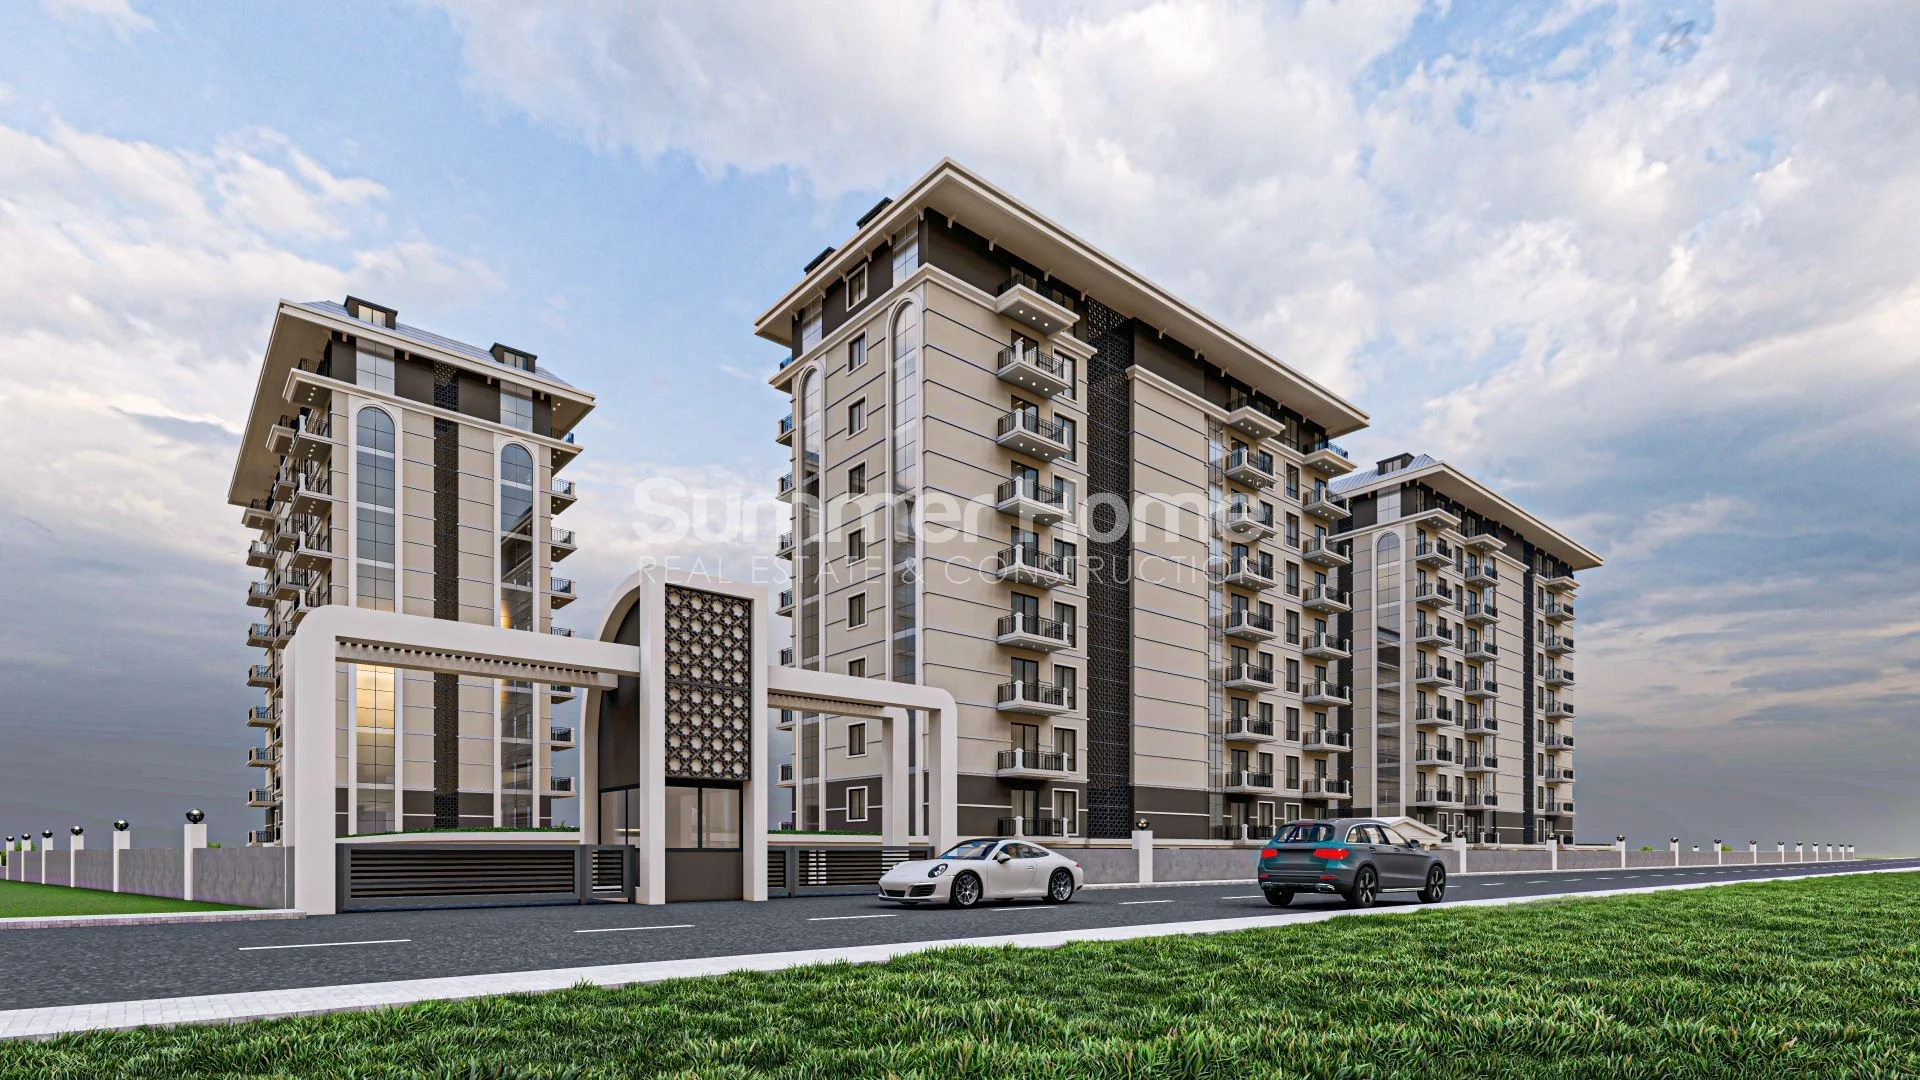 Modern, Chic Apartments For Sale in Demirtas General - 18